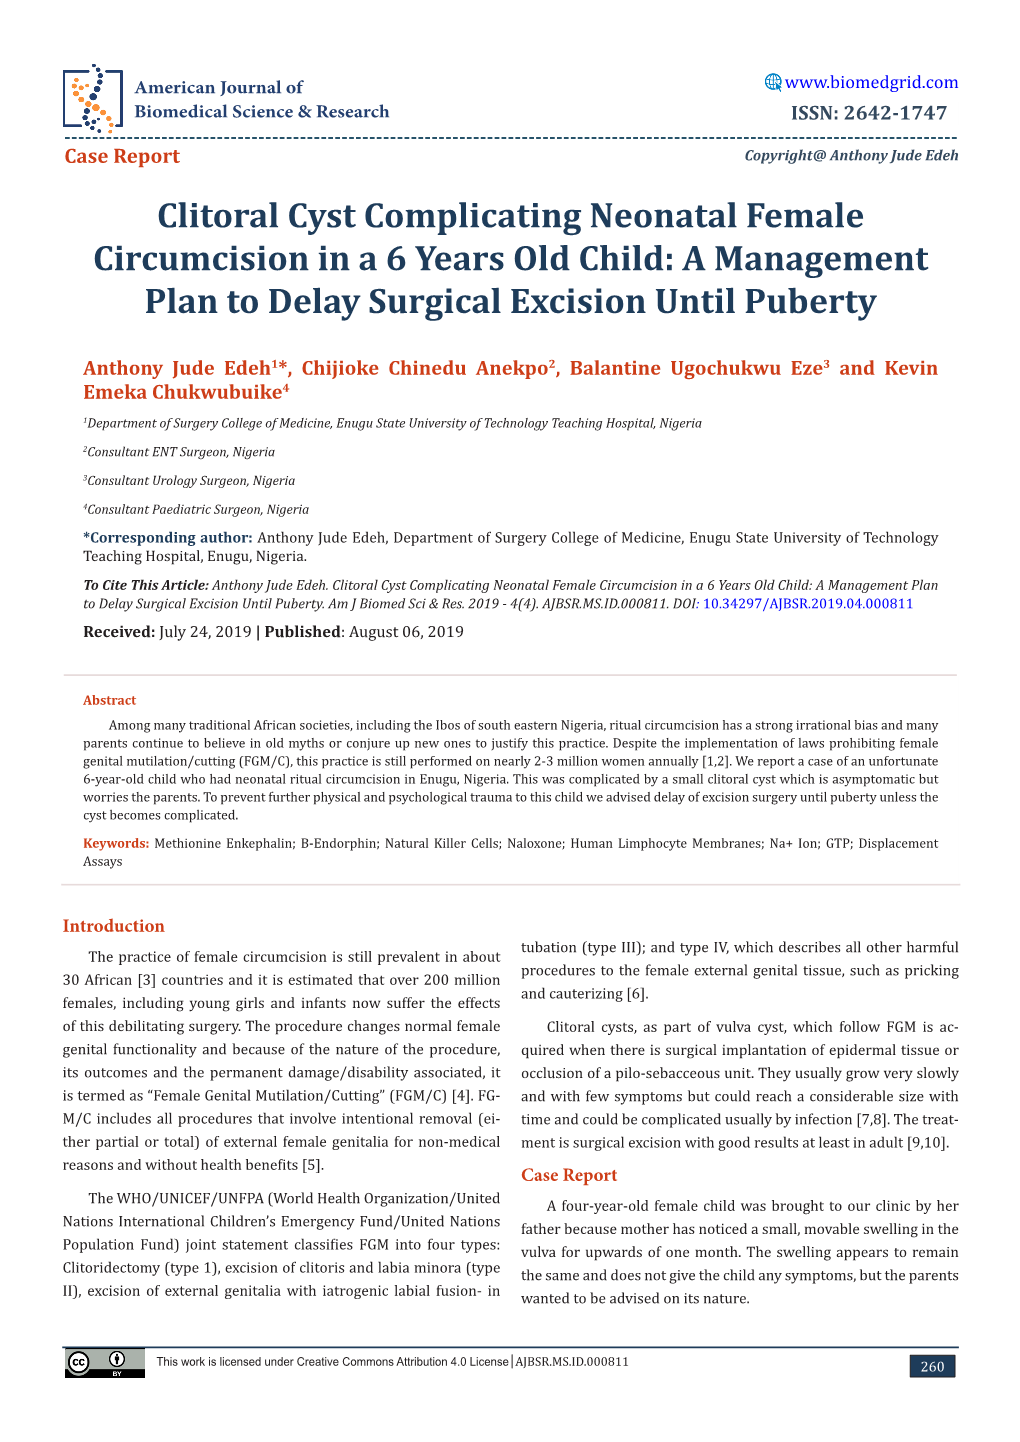 Clitoral Cyst Complicating Neonatal Female Circumcision in a 6 Years Old Child: a Management Plan to Delay Surgical Excision Until Puberty